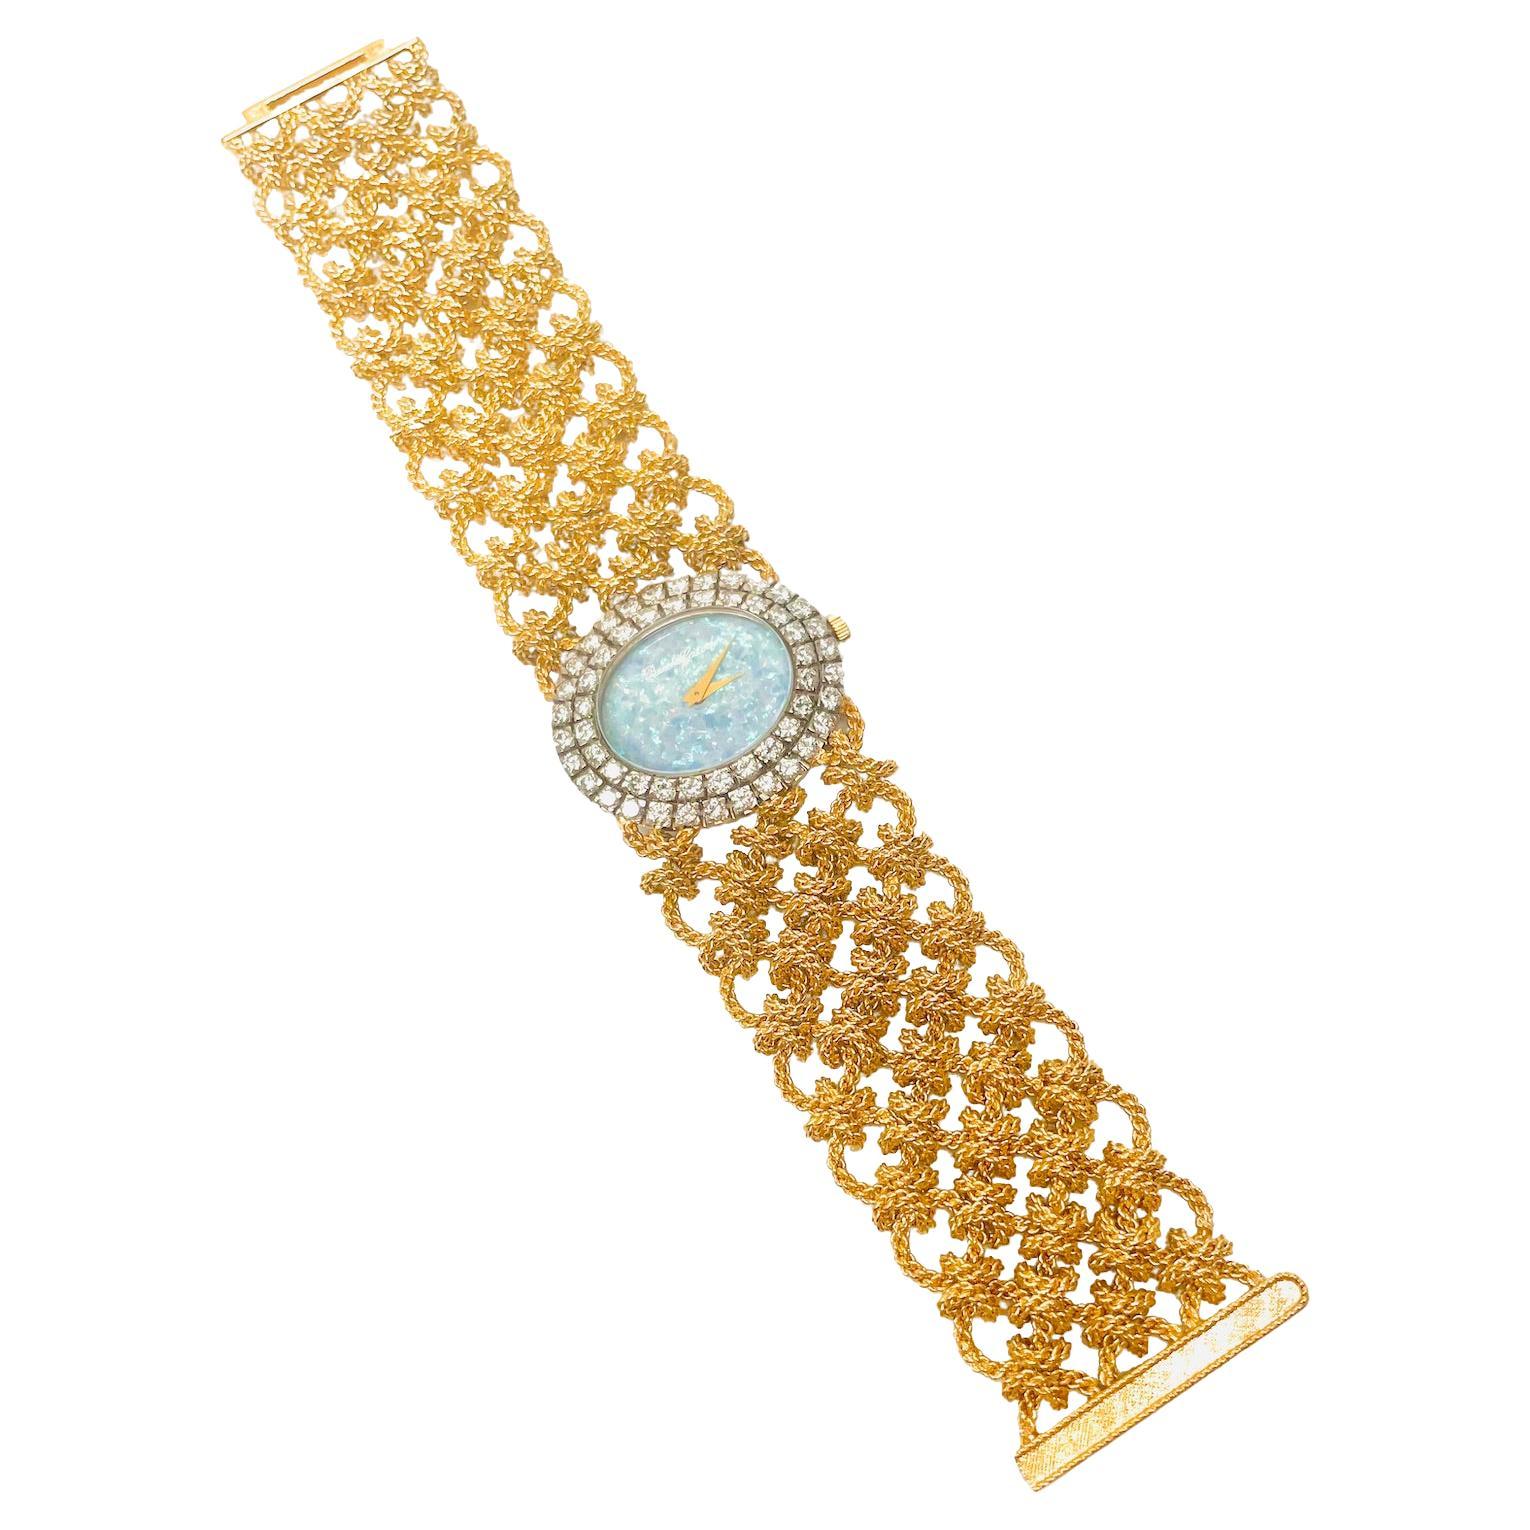 Bueche Girod Diamond, Opal, 18k Gold Watch. French made. 
This watch has an Oval shaped Opal Face measuring 20.5 mm x 17 mm. It is surrounded by two rows of Round Brilliant Full Cut Diamonds.  There are 54 Diamonds weighing approximately 2.45